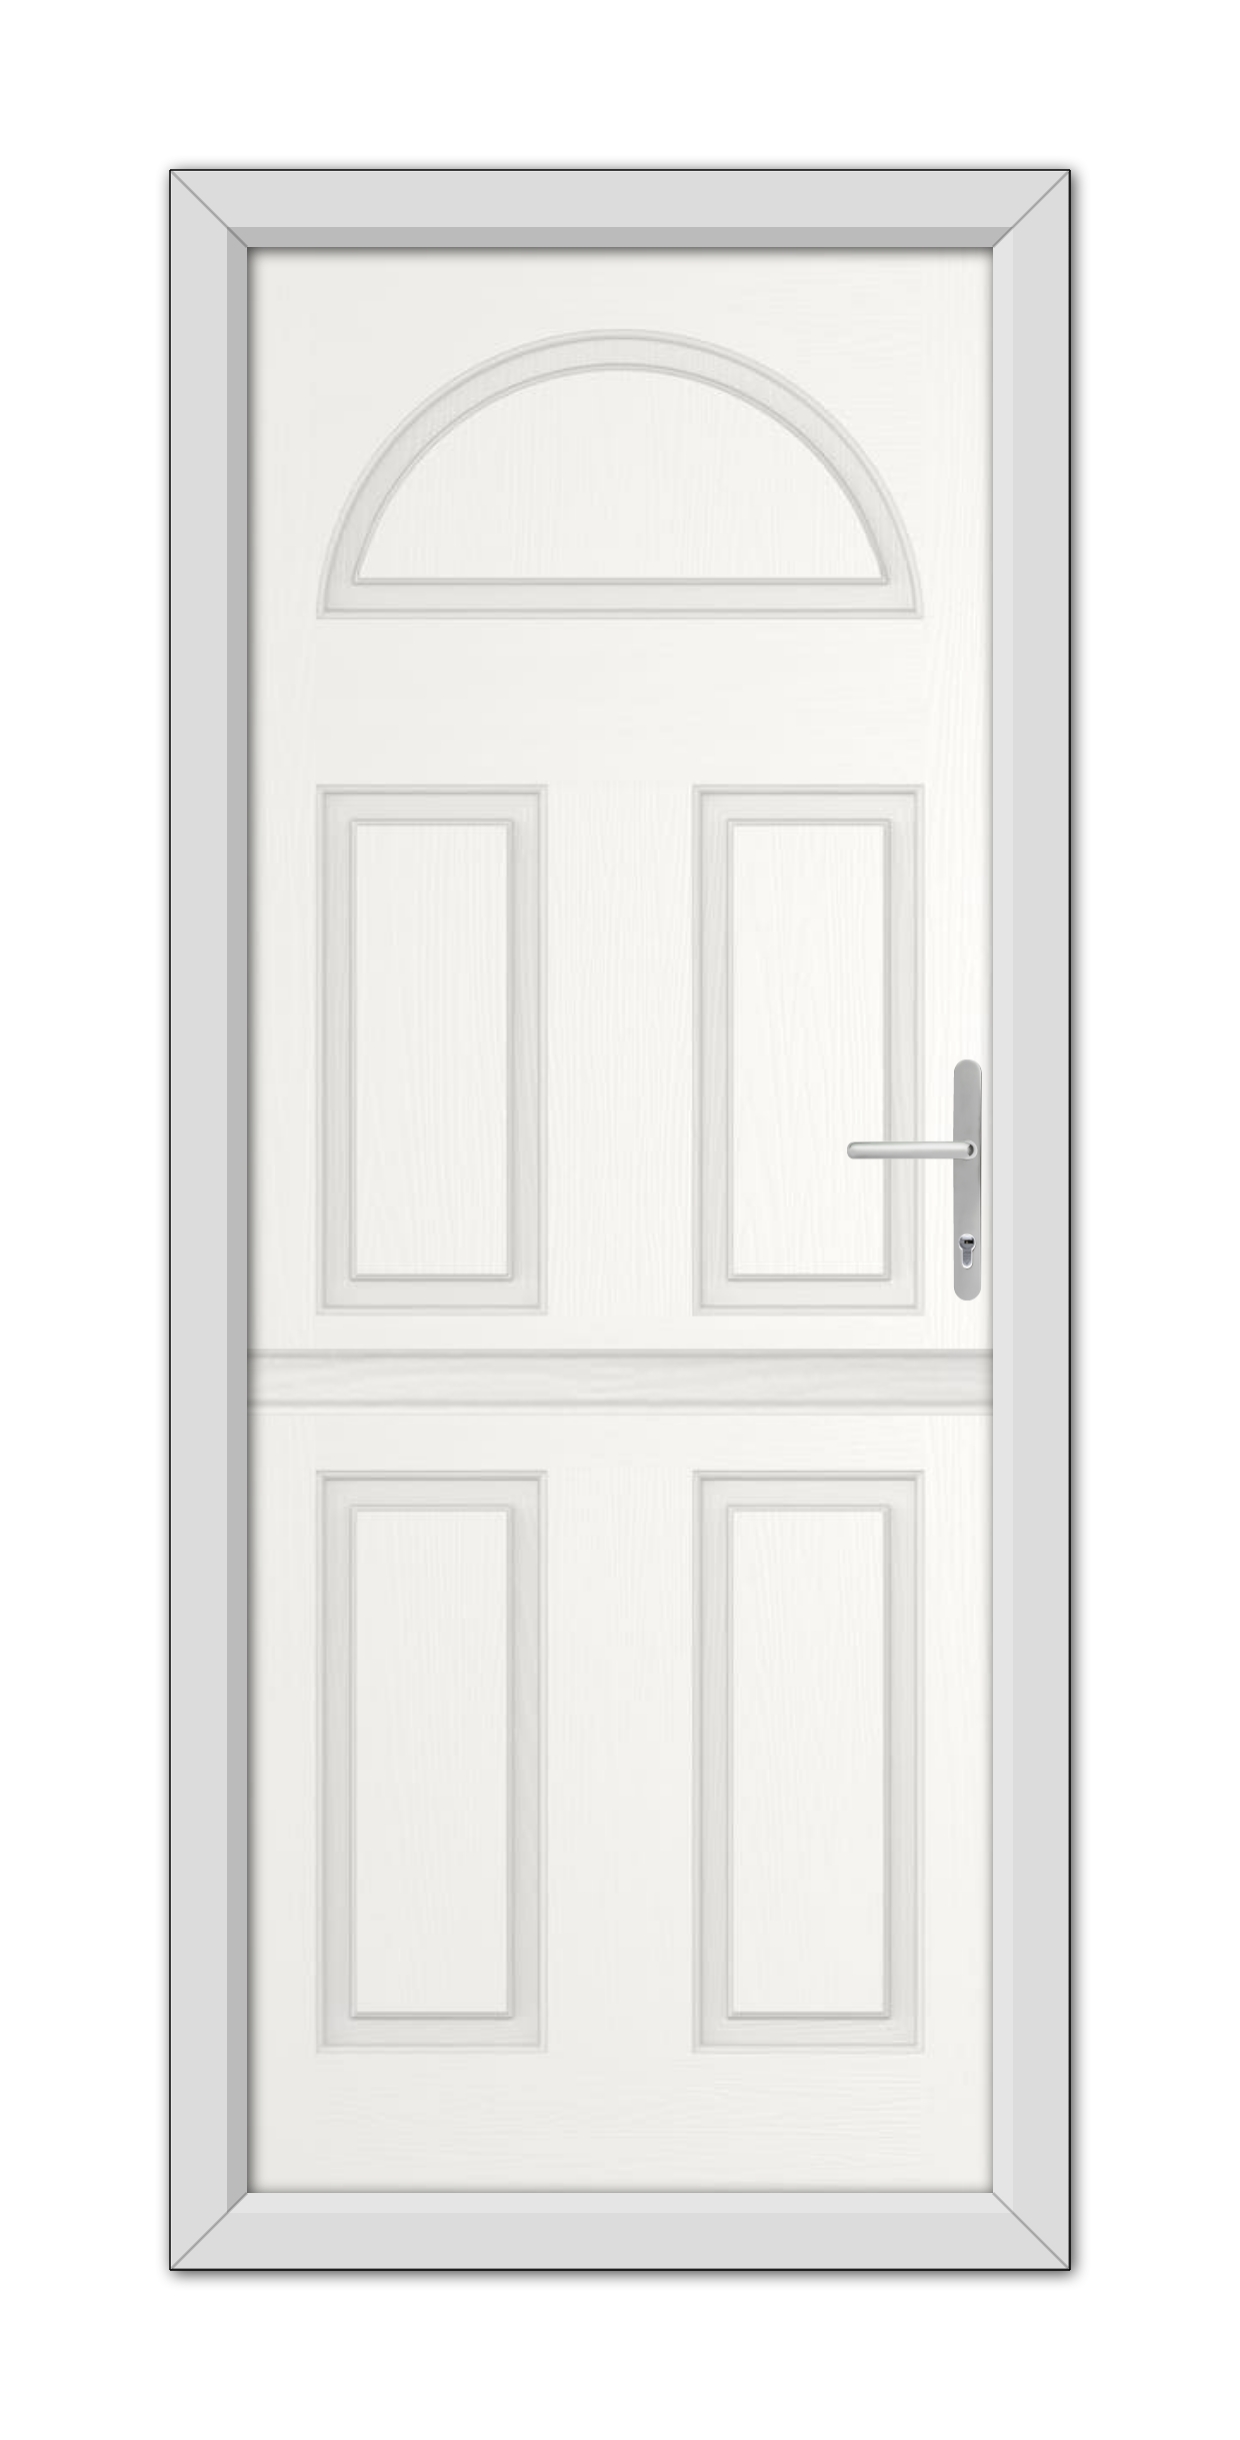 A White Winslow Solid Stable Composite Door with a semicircular arch window at the top and a modern handle, set in a plain frame.